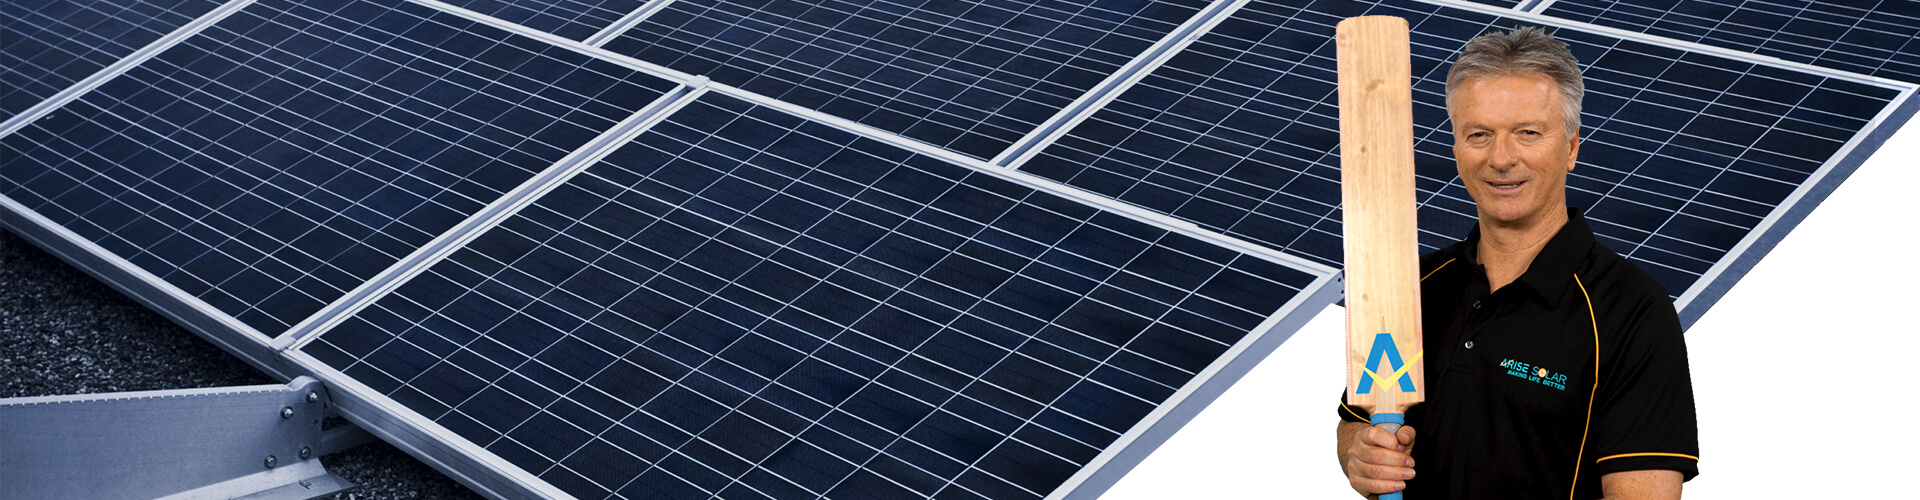 Go Solar with this SIXER – A 6 point guide on going solar, smartly